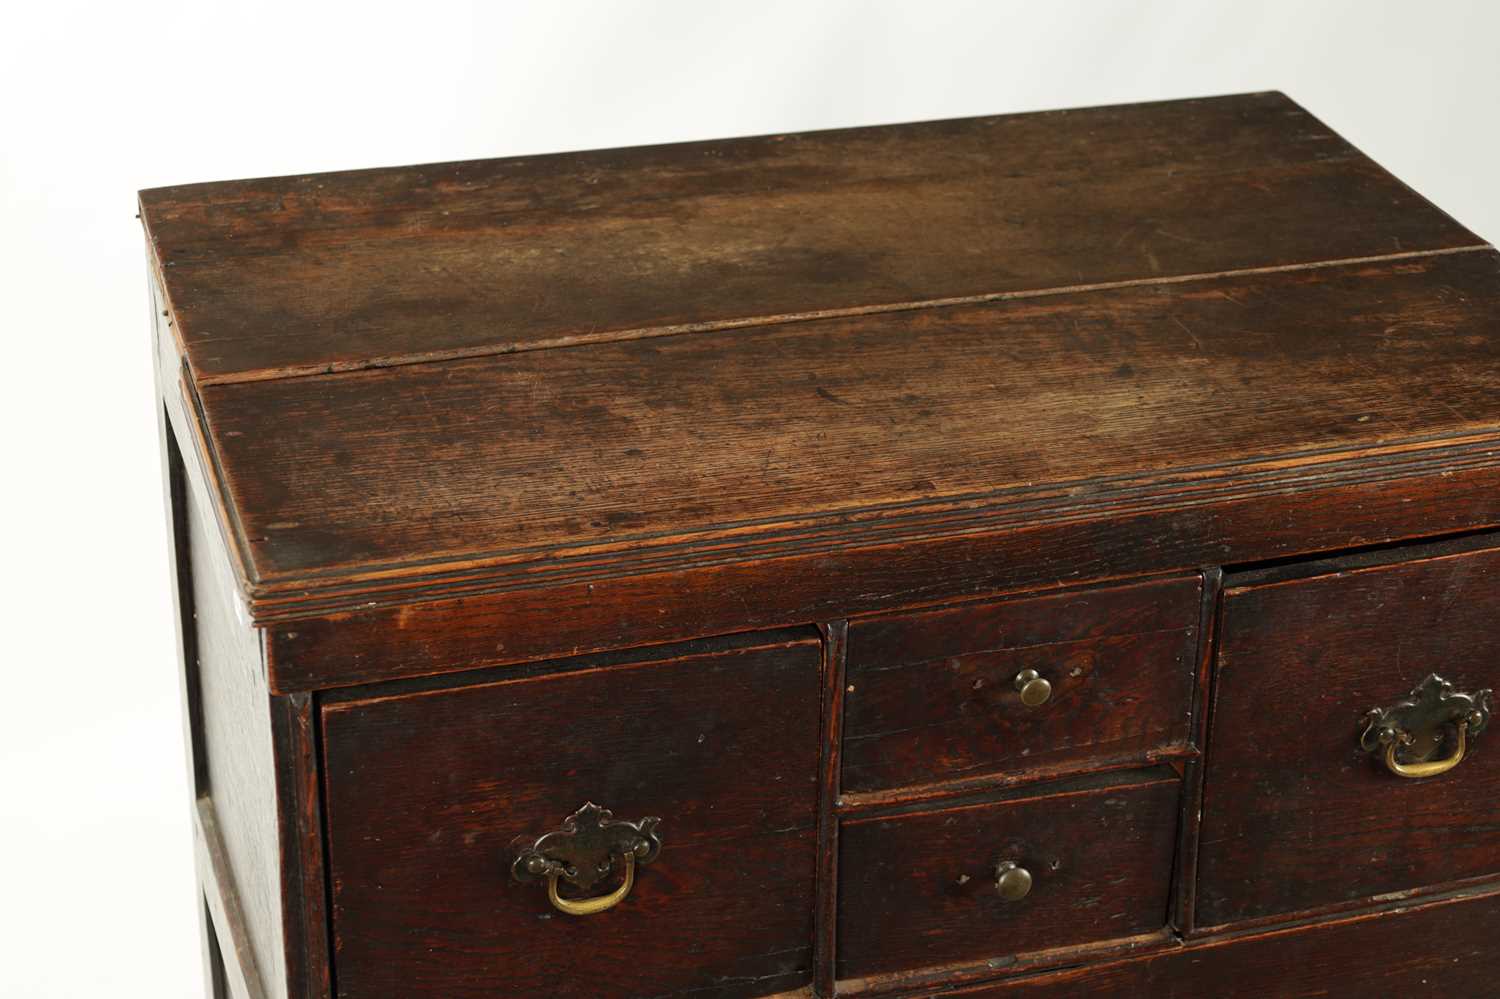 AN EARLY 19TH CENTURY OAK NORFOLK / SUFFOLK CHEST OF DRAWERS - Image 2 of 12